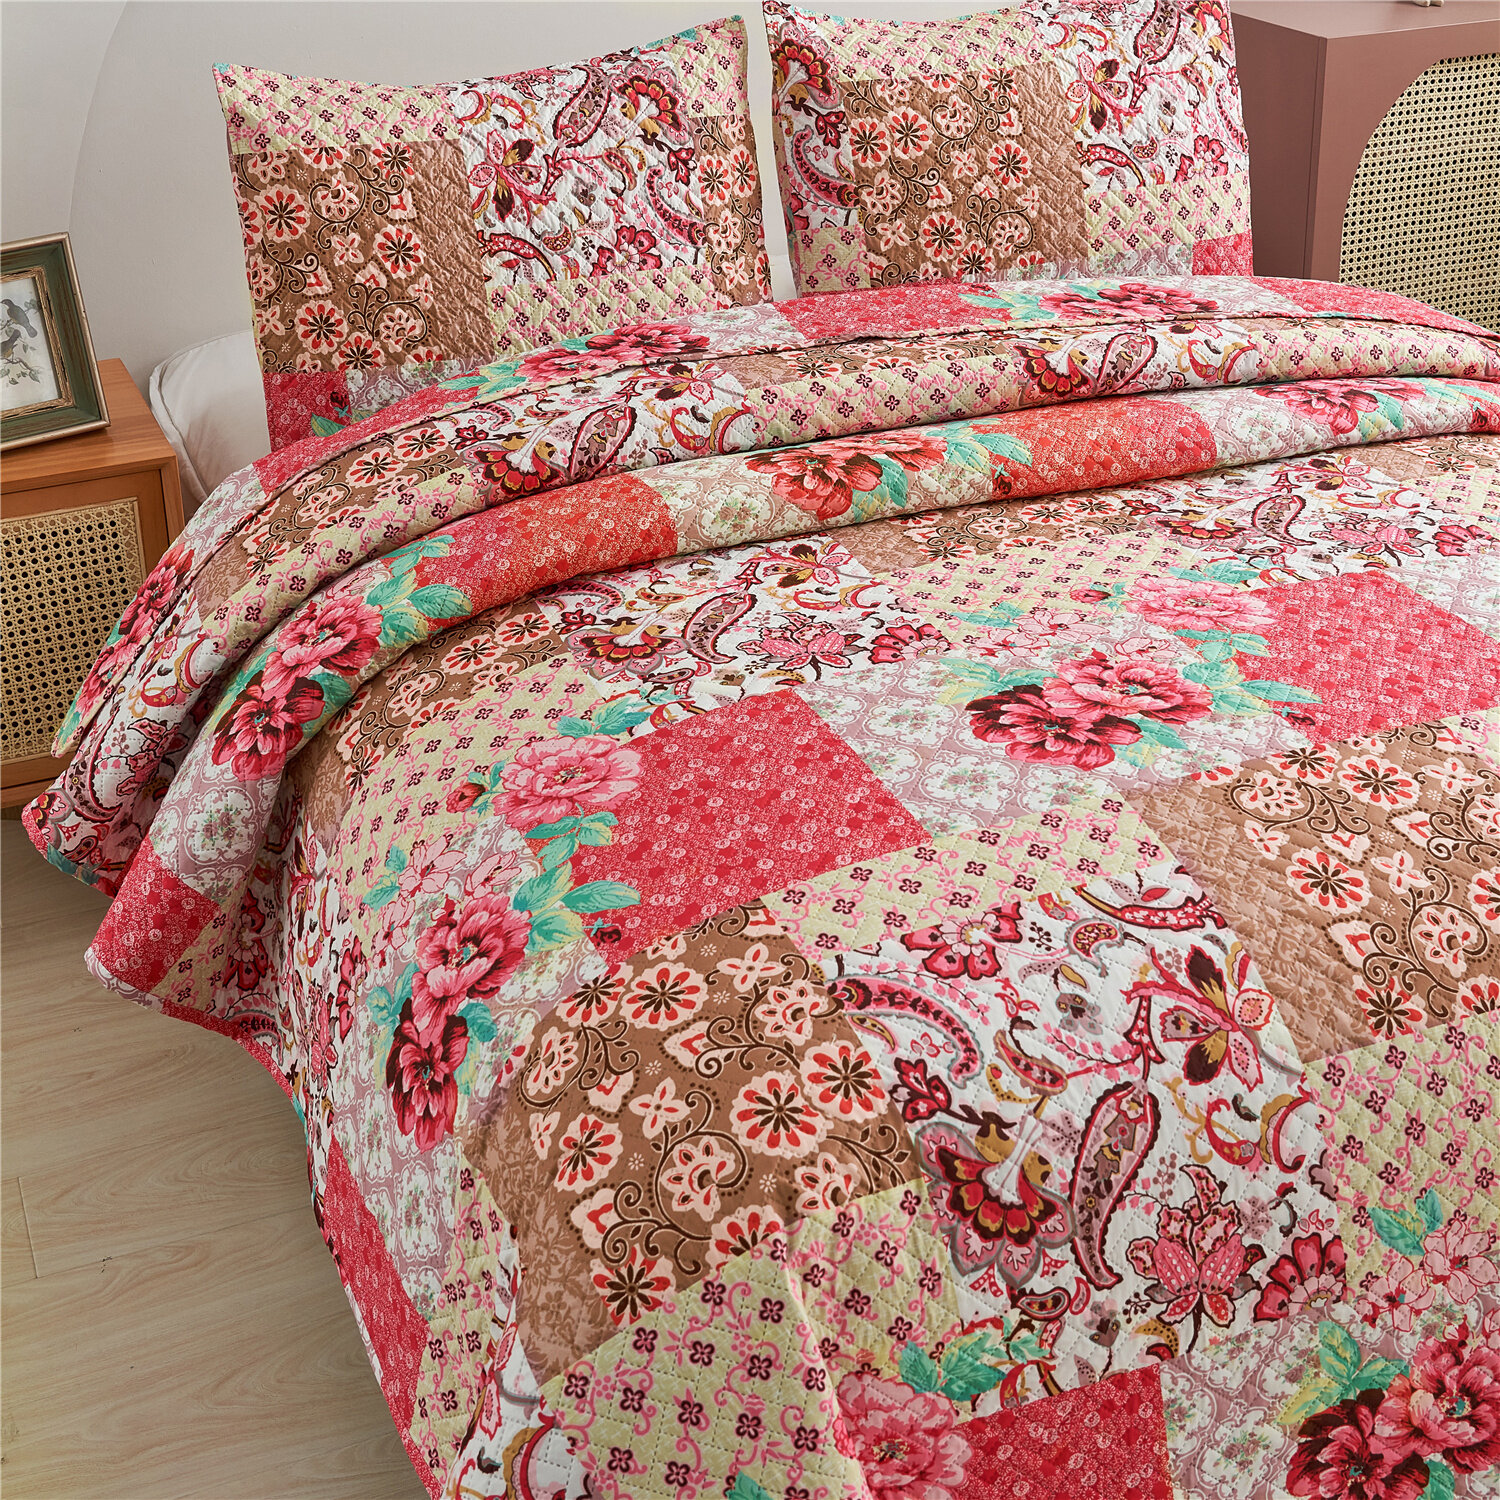 Decorative Bedroom Accessories super king bed Bedspread Bedding Double Bed New Printed Patchwork 3 Piece Bedspread Set Comforter Throw Set Blossom